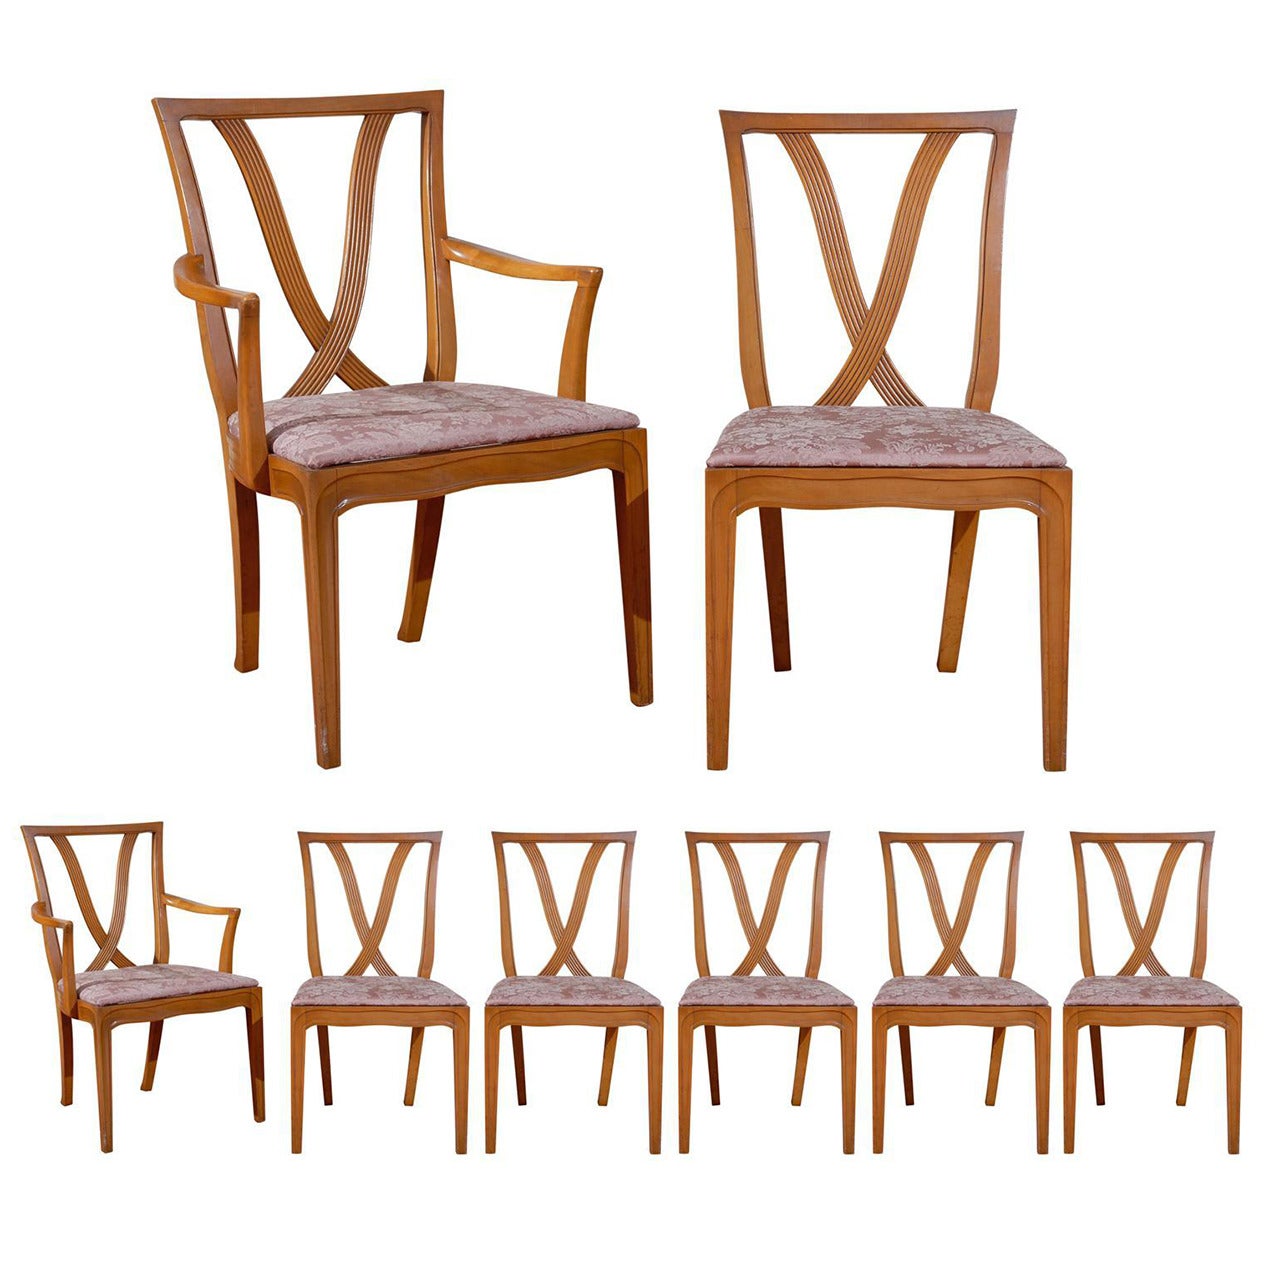 Stunning Set of 8 Dining Chairs by Tomlinson, 1955 - Choice of Lacquer Color  For Sale